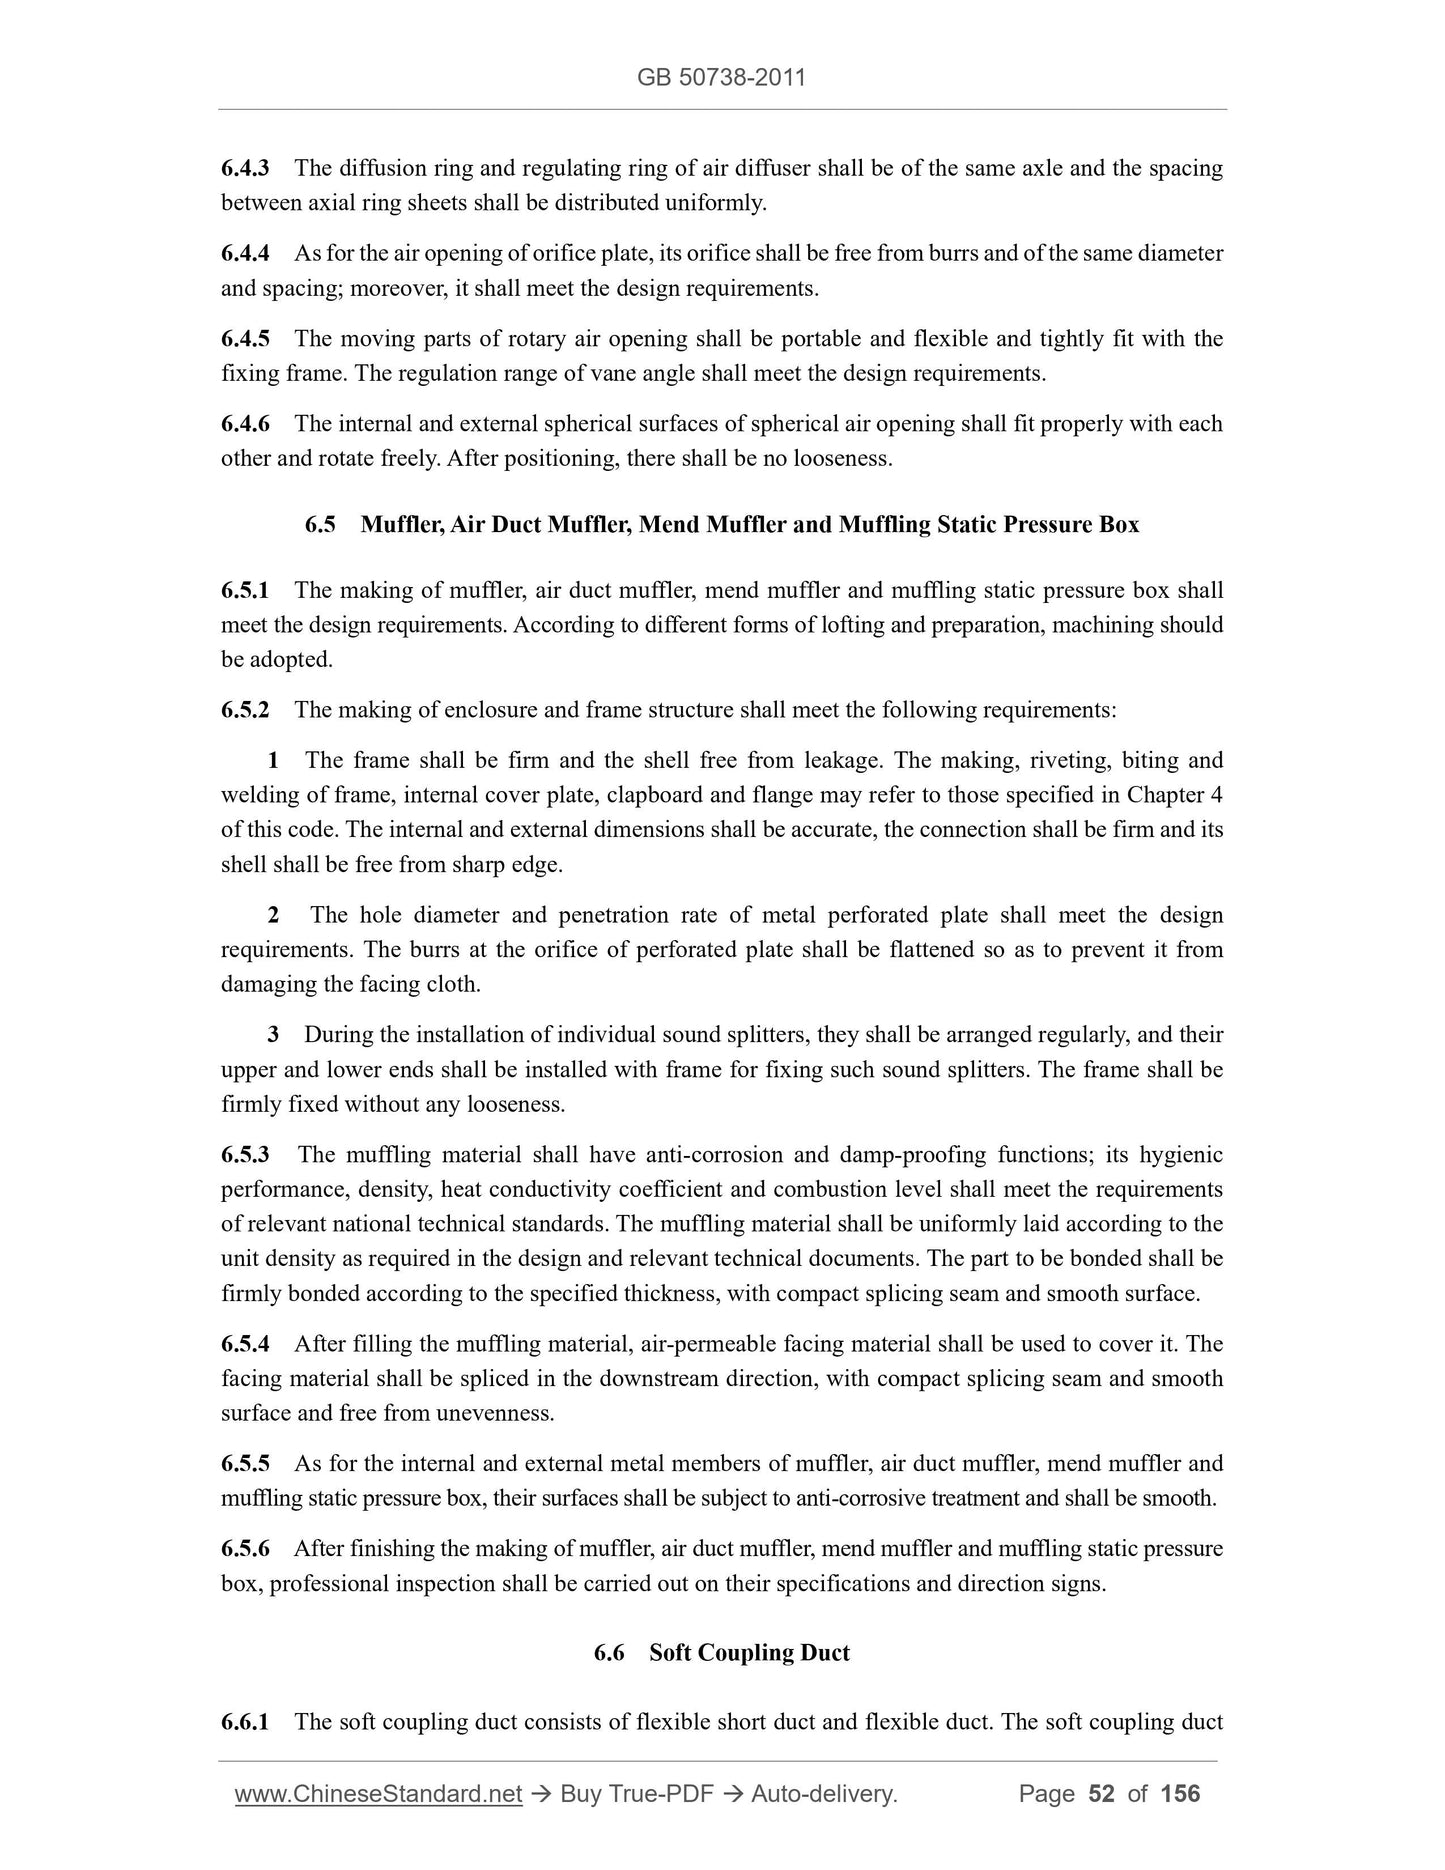 GB 50738-2011 Page 10